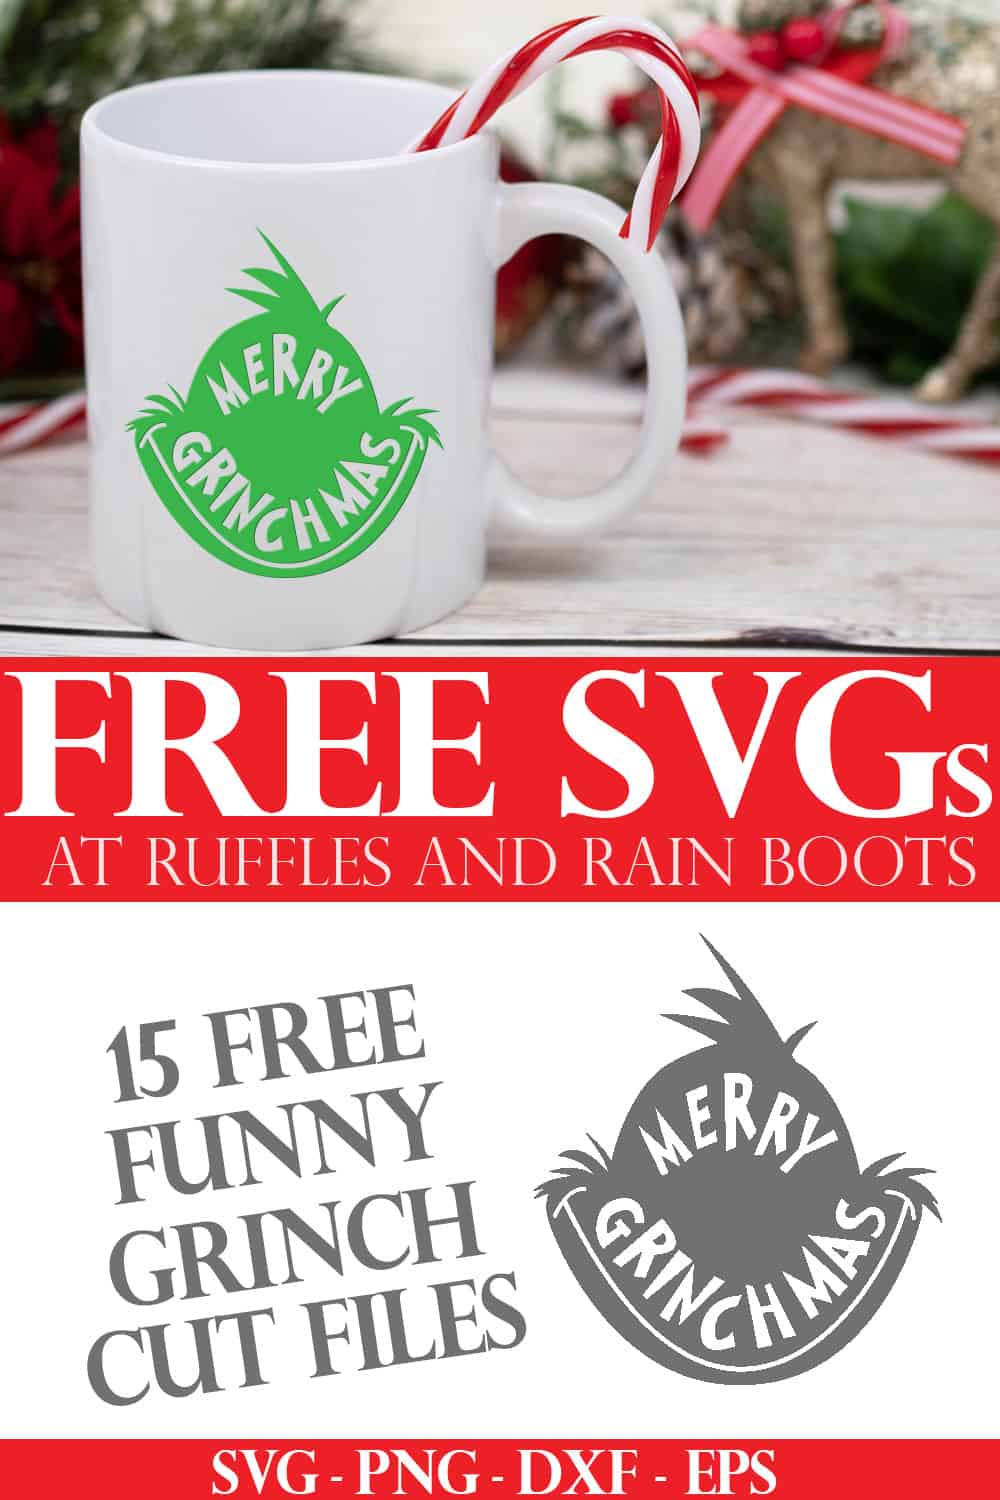 adorable merry grinchmas coffee mug on holiday background with text which reads free svg for cricut from Ruffles and Rain Boots